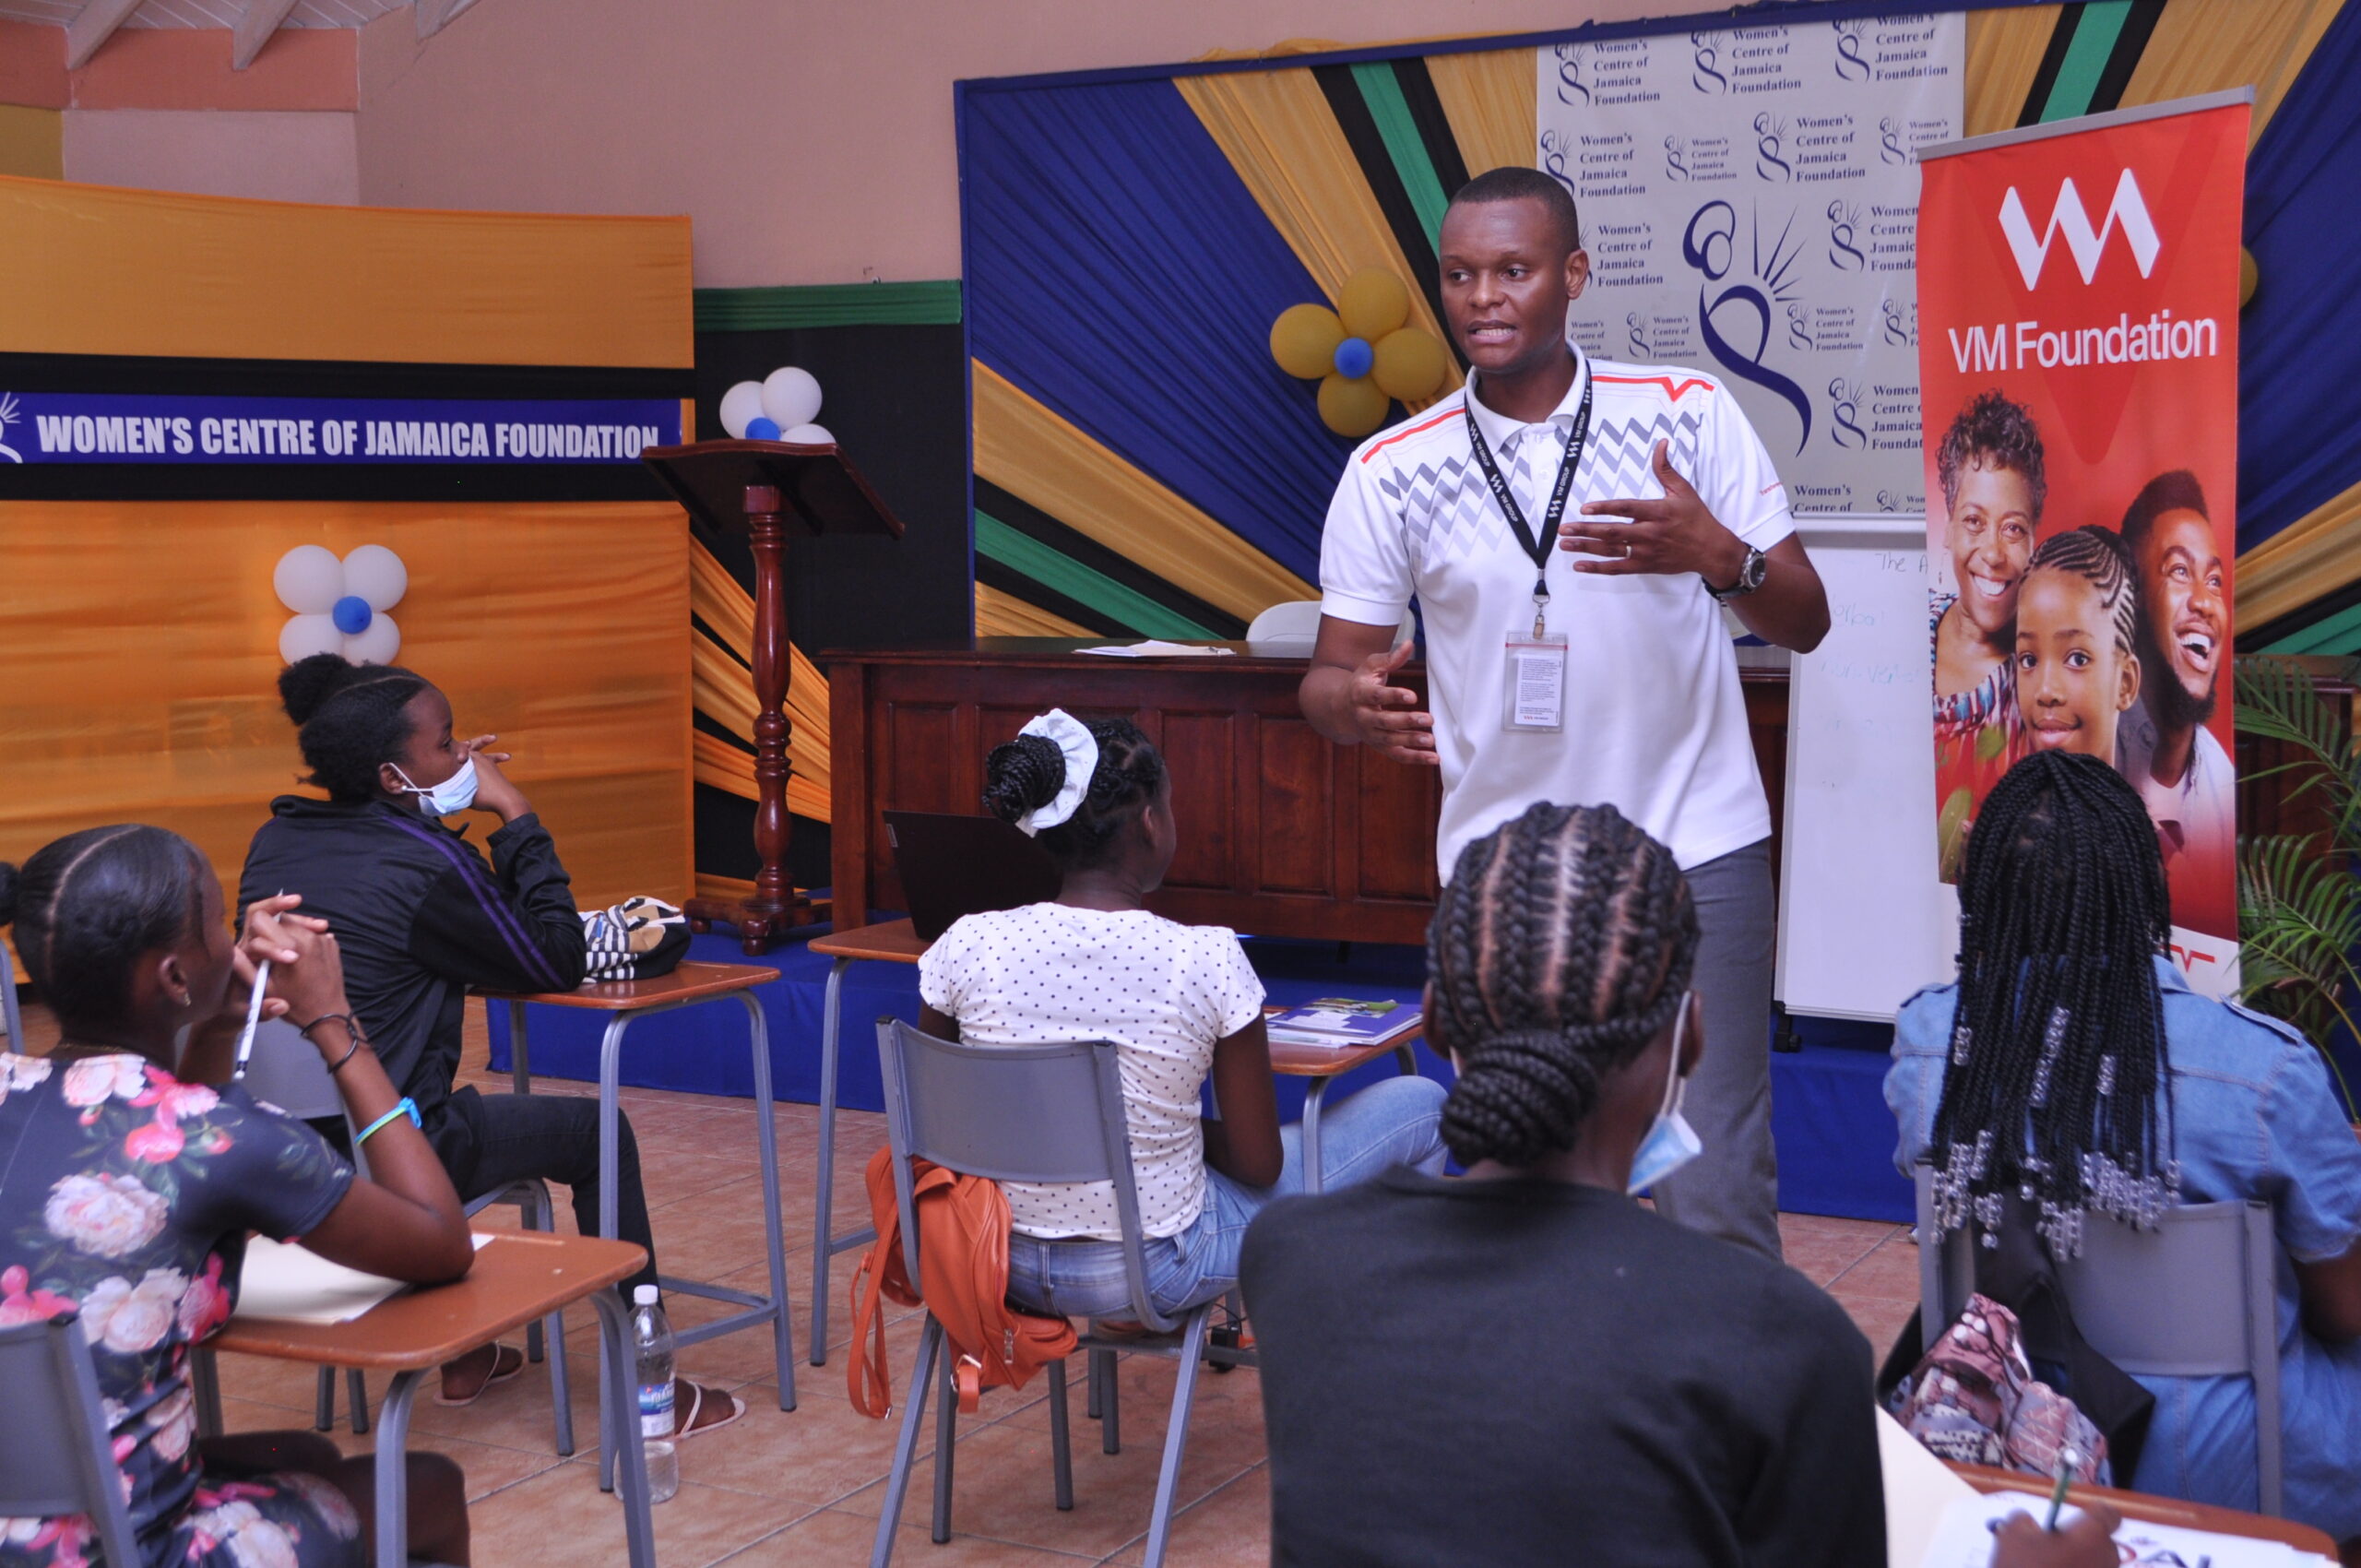 Andre Alleyne, Assistant Supervisor for Customer Service at VM Building Society - New Kingston Branch, leads an introductory financial literacy session as part of the activities for the Finishing School Programme for Adolescent Mothers, an initiative of the Women’s Centre of Jamaica Foundation.